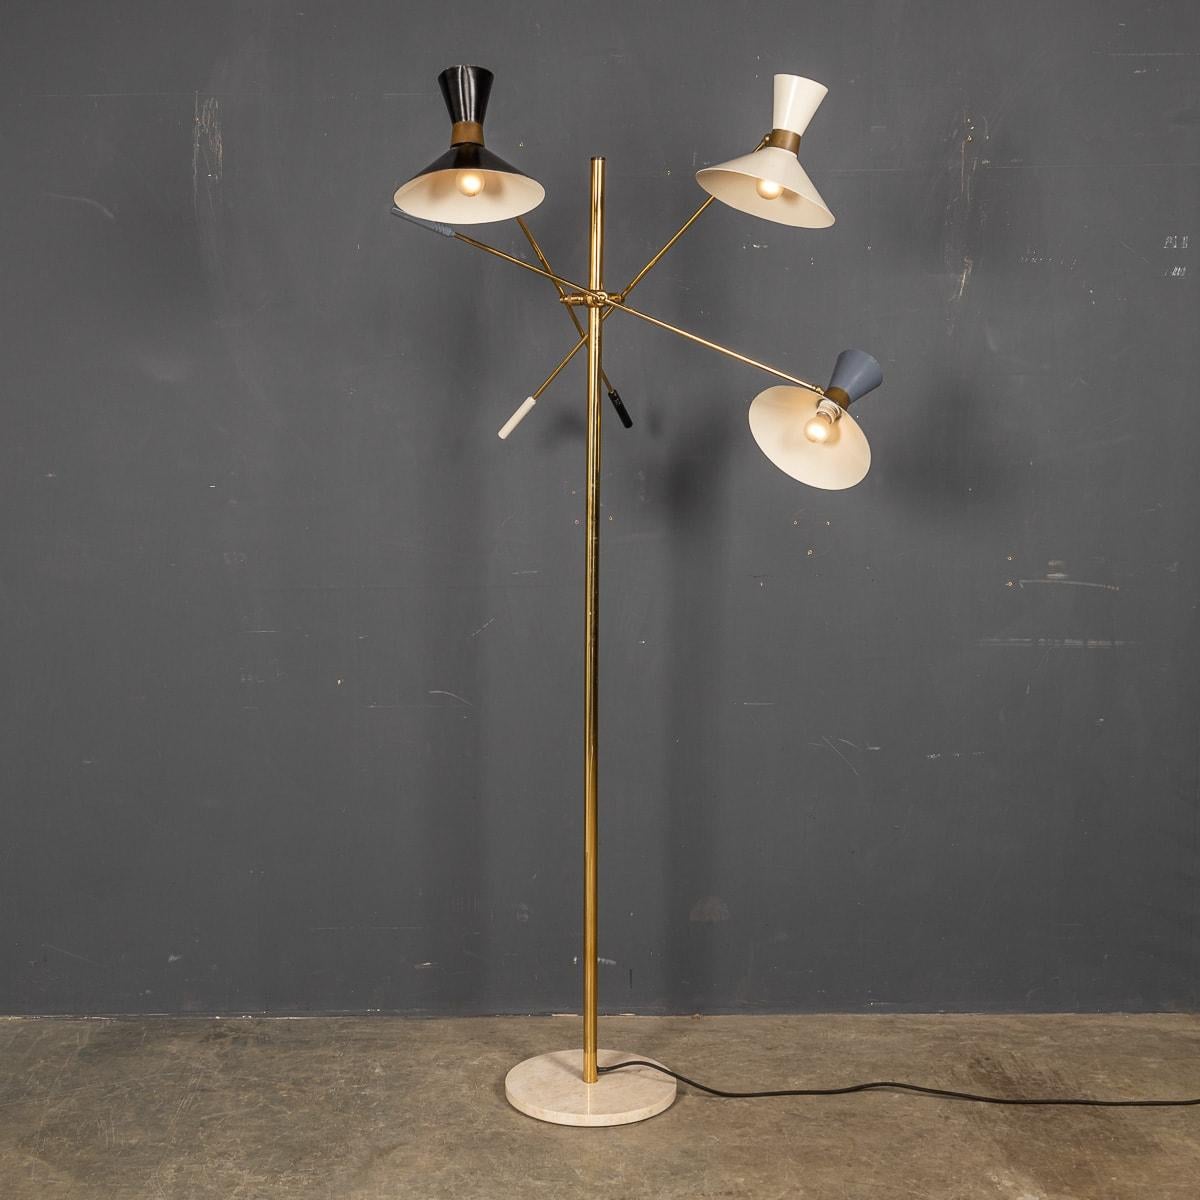 A stylish 20th Century Italian articulated standing lamp with three movable brass arms, brass body column and supported by original thick marble base. Original wiring and in working condition. Based on the original design designed by Bruno Gatta in